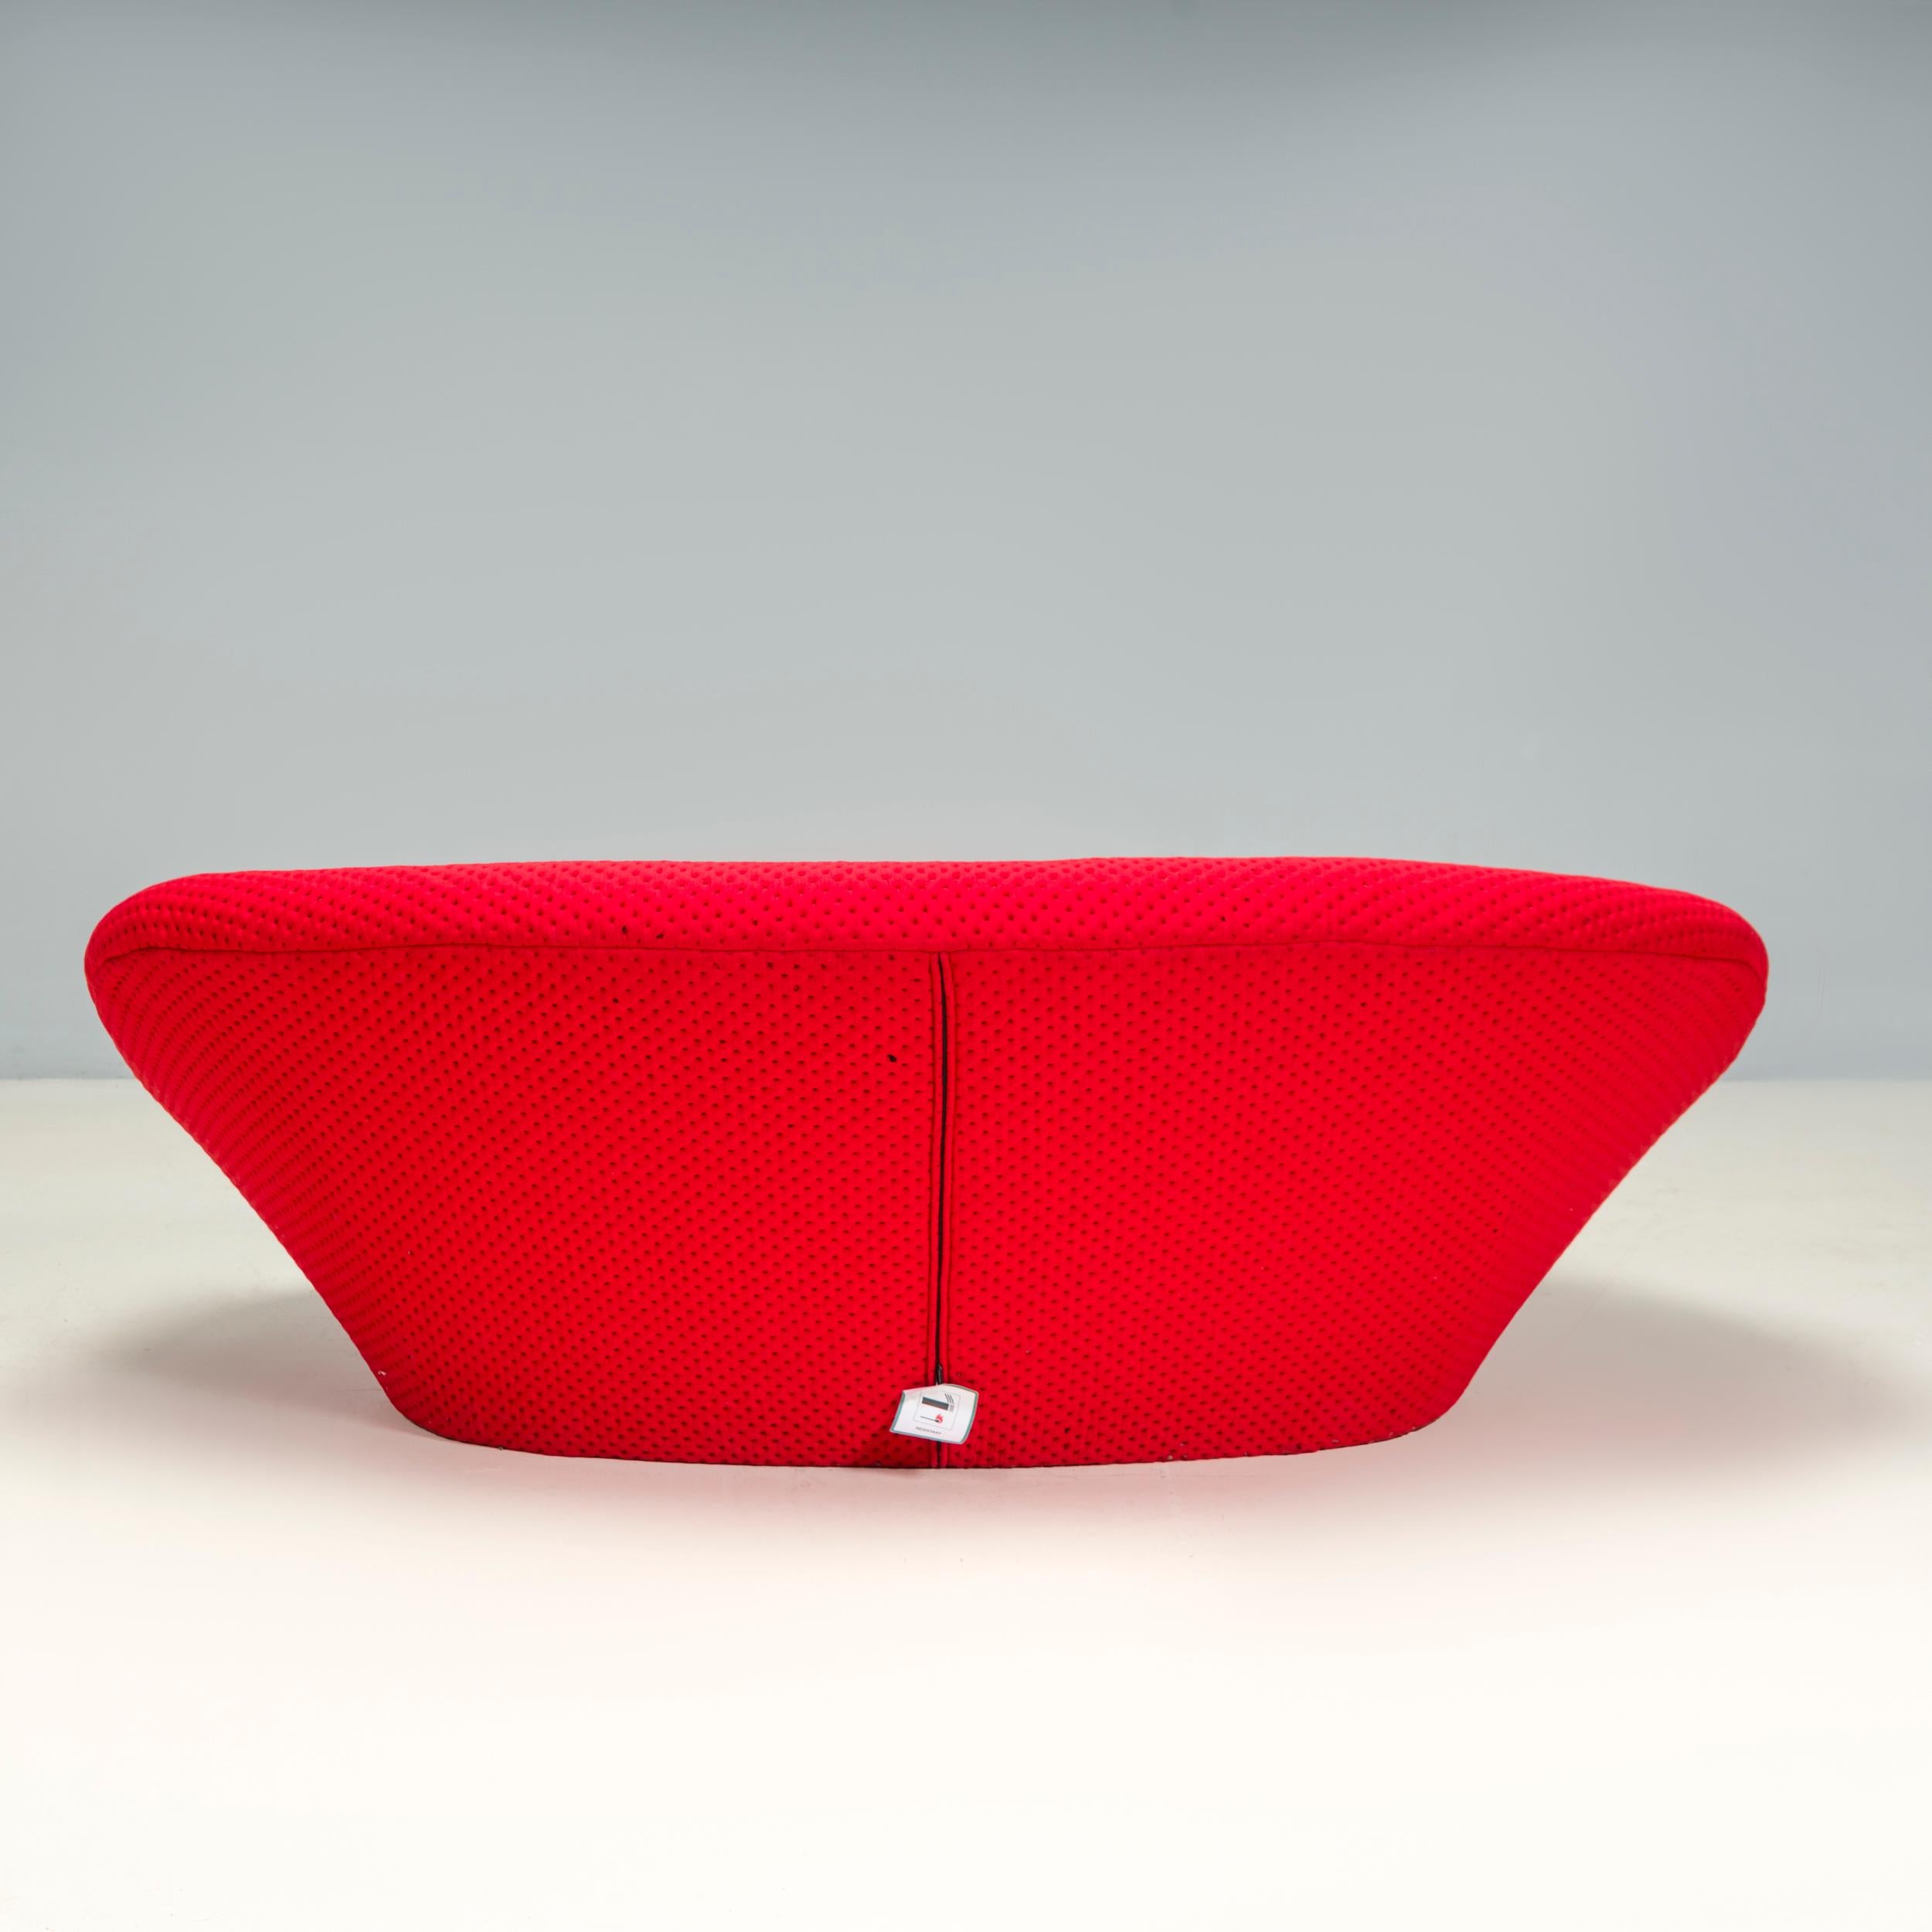 Ligne Roset by Erwan & Ronan Bouroullec Ploum High Back Red Sofa In Fair Condition For Sale In London, GB